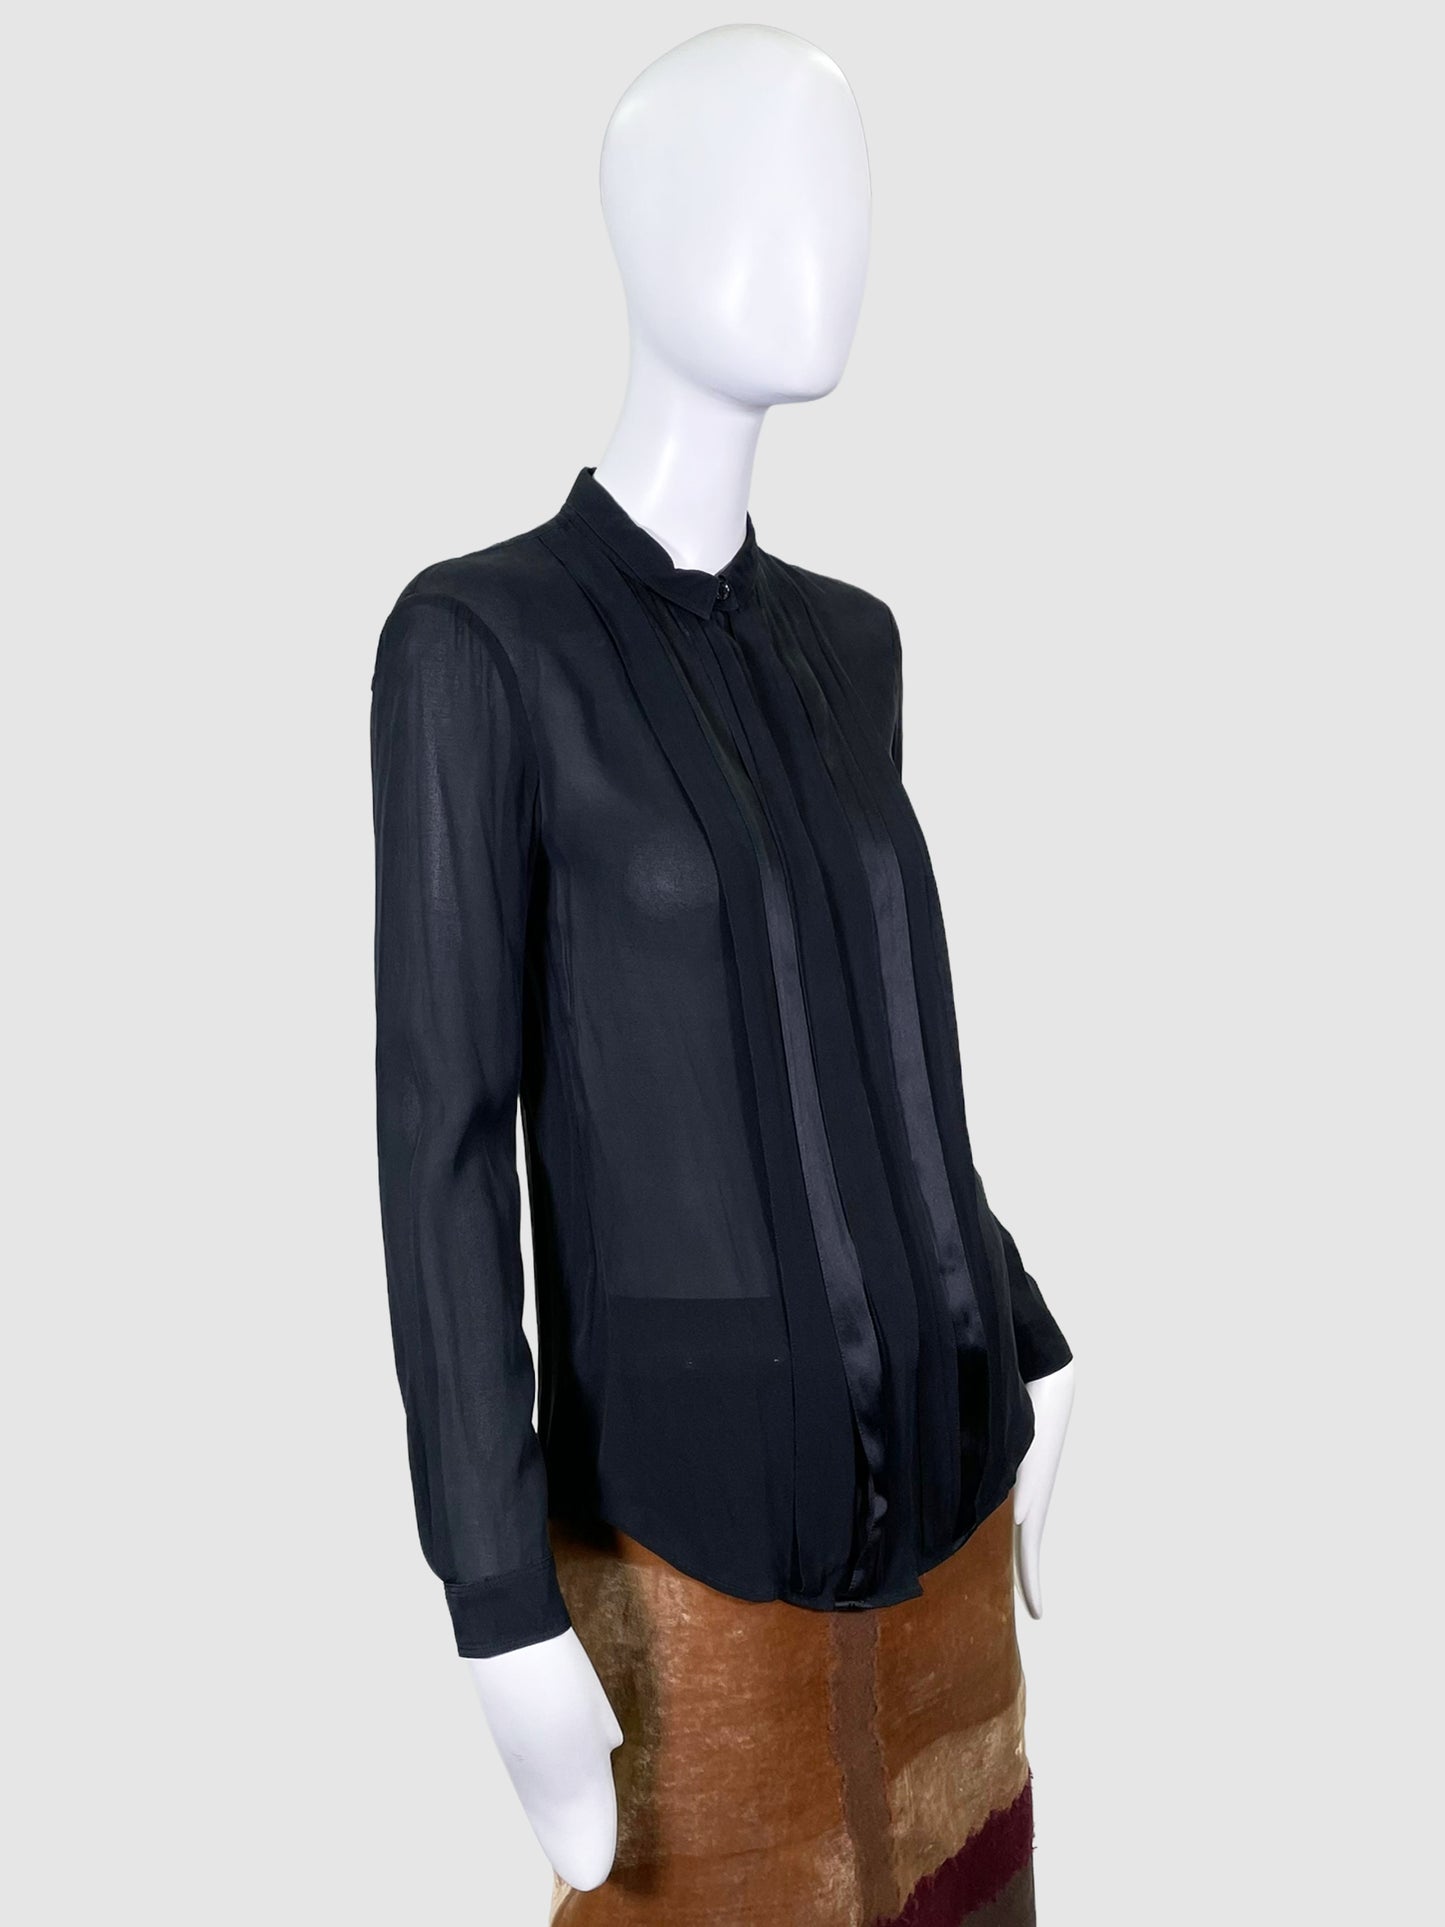 Burberry Sheer Blouse - Size 4